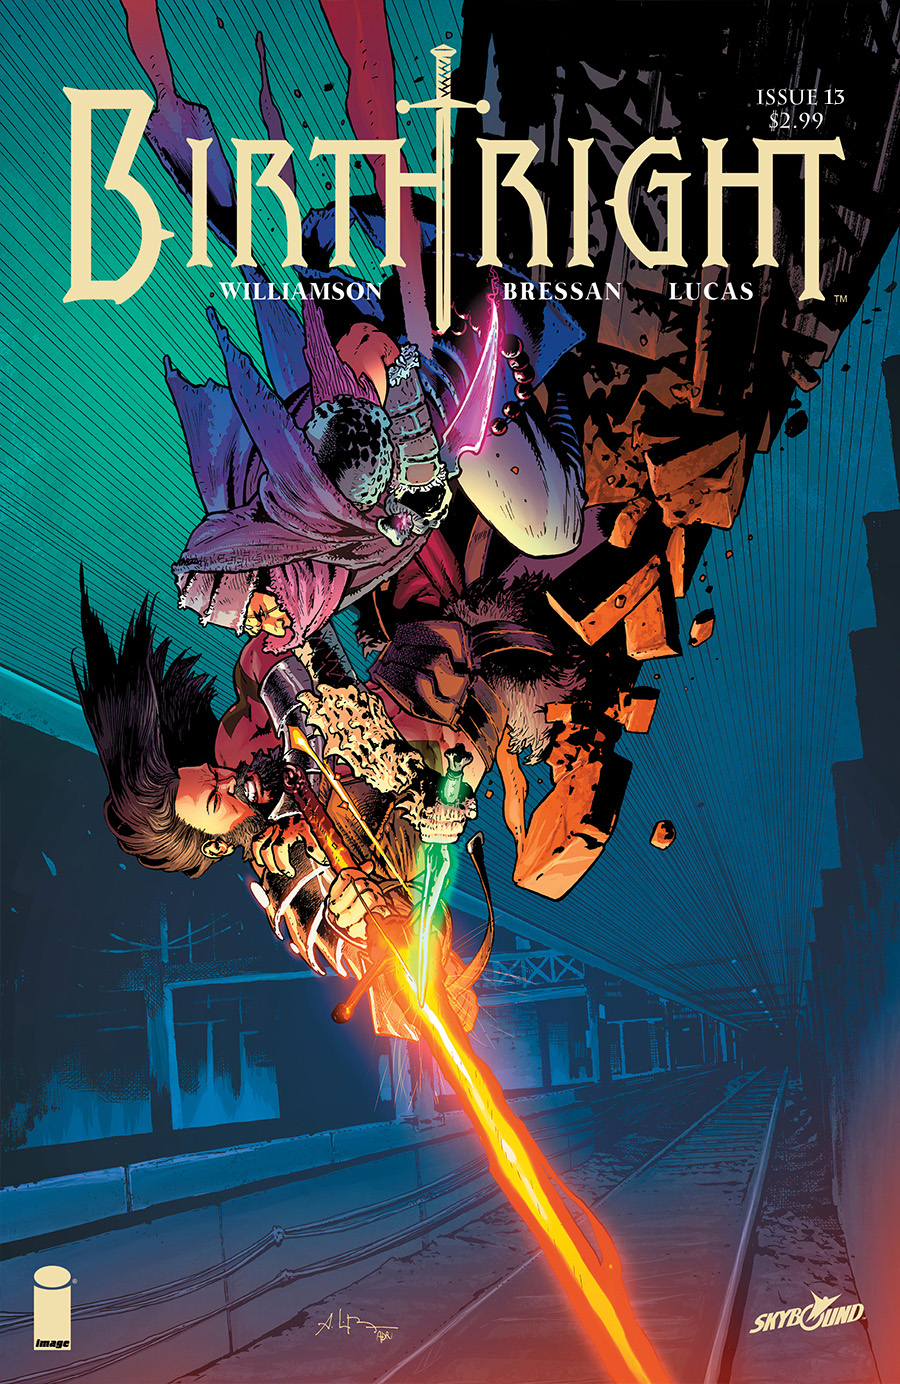 Birthright #13 Preview